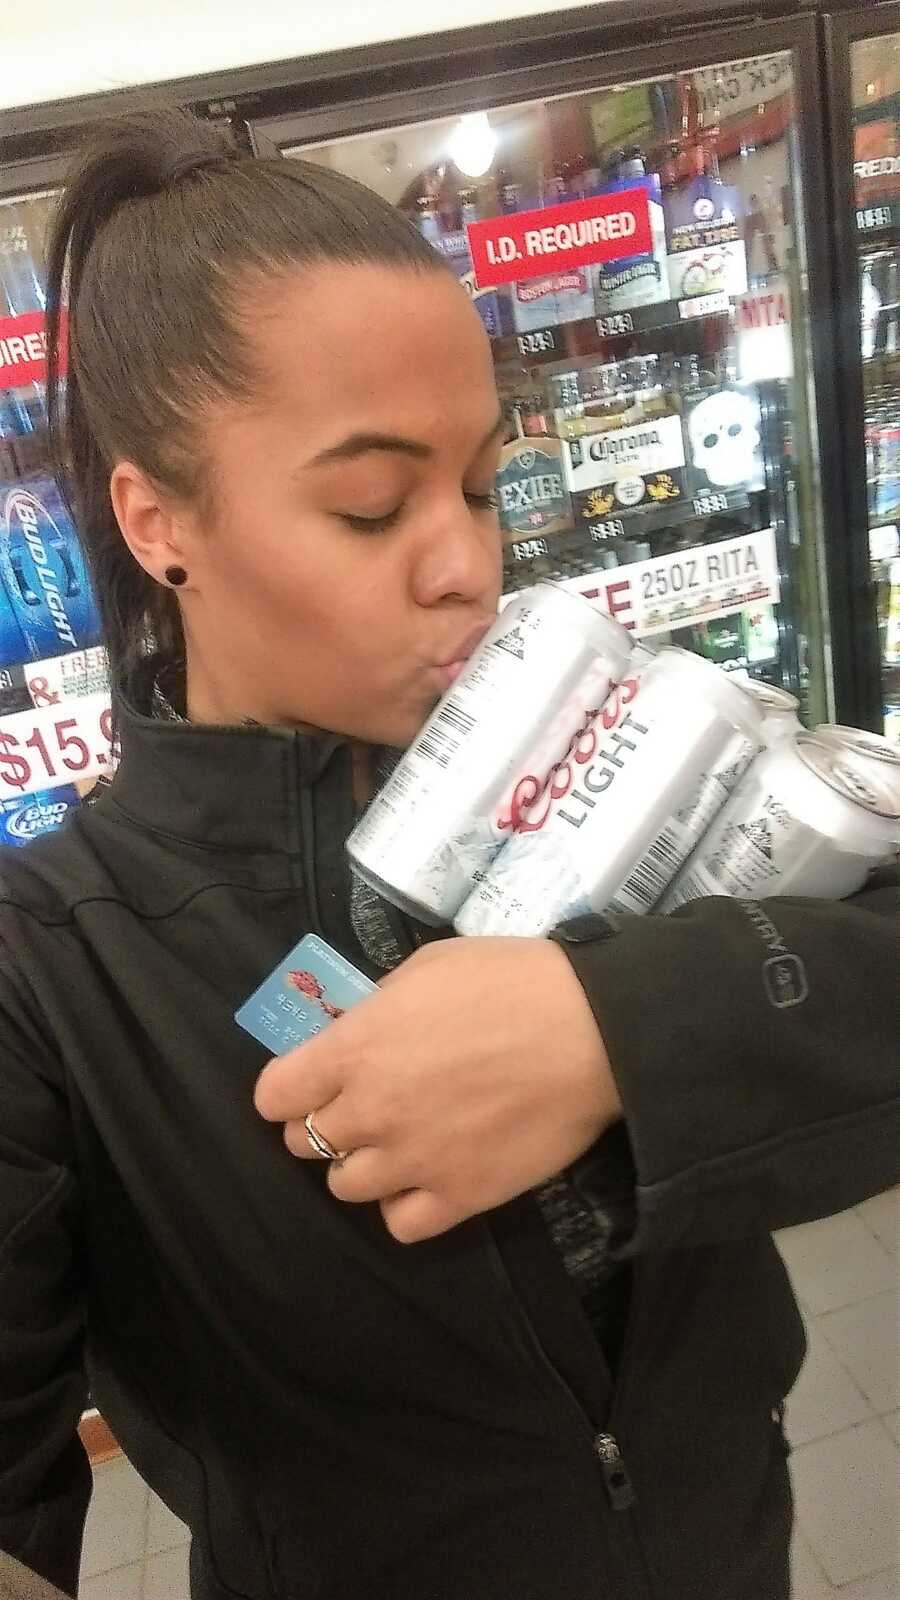 Woman sends a funny picture of her kissing a Coors Light to her crush